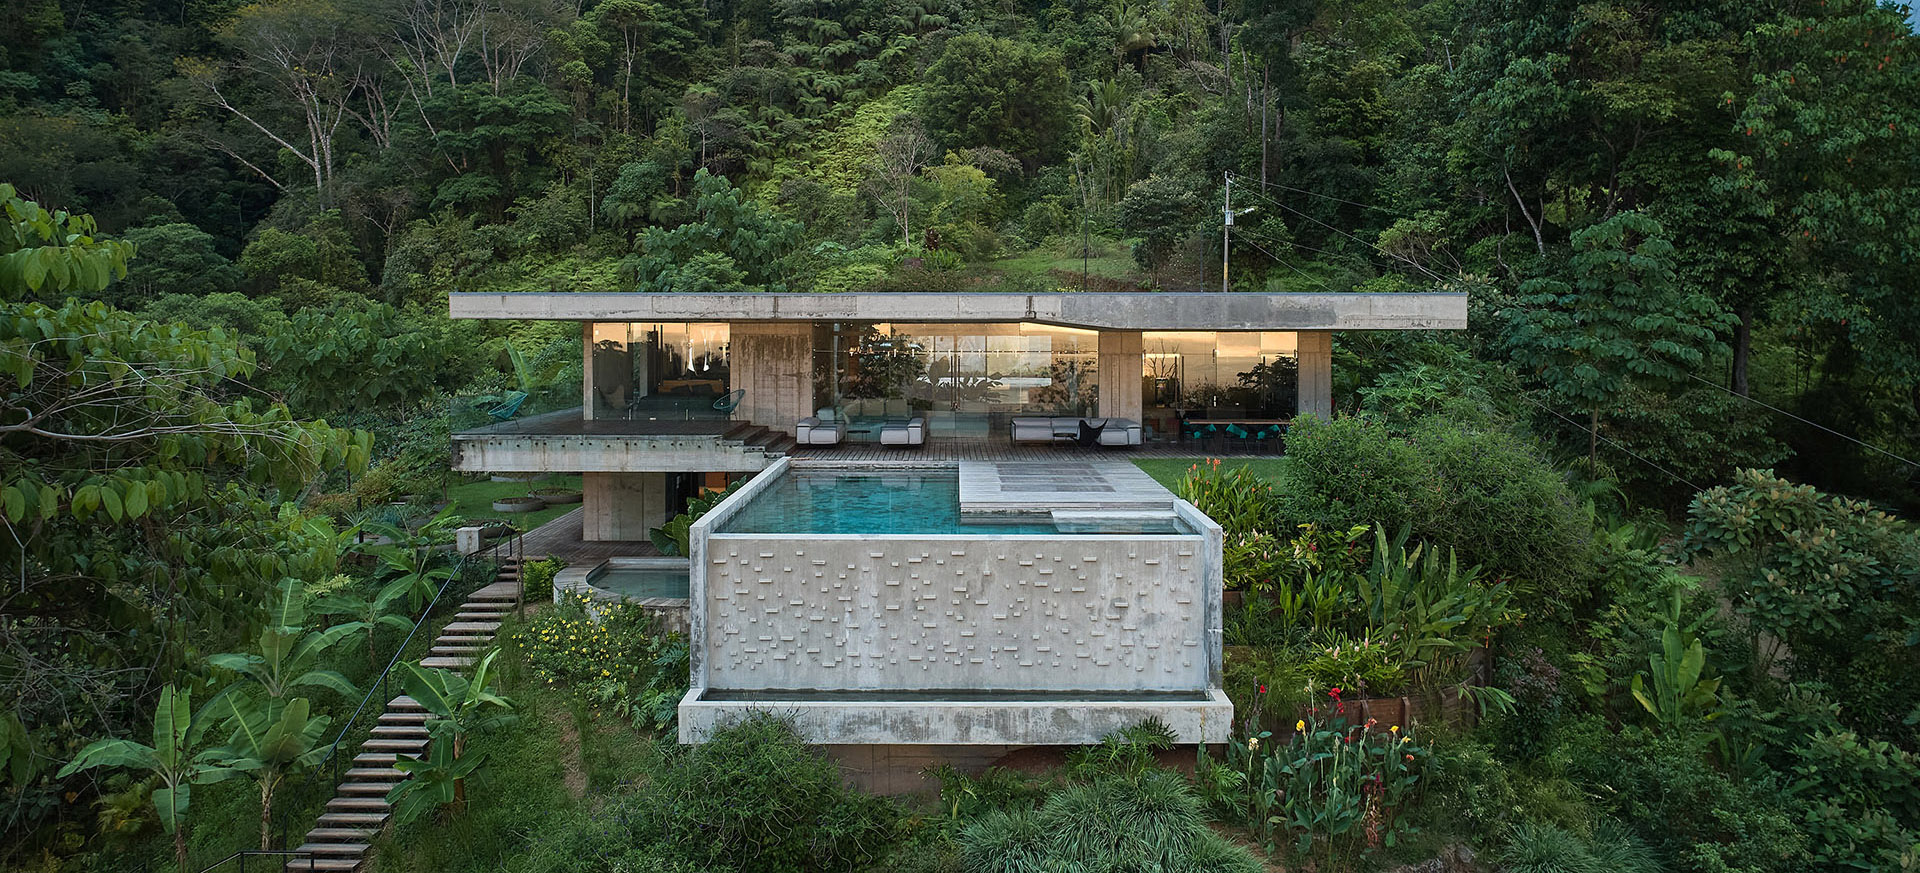 Villa inspired by the laws of the jungle. A balance between nature and luxury accommodation